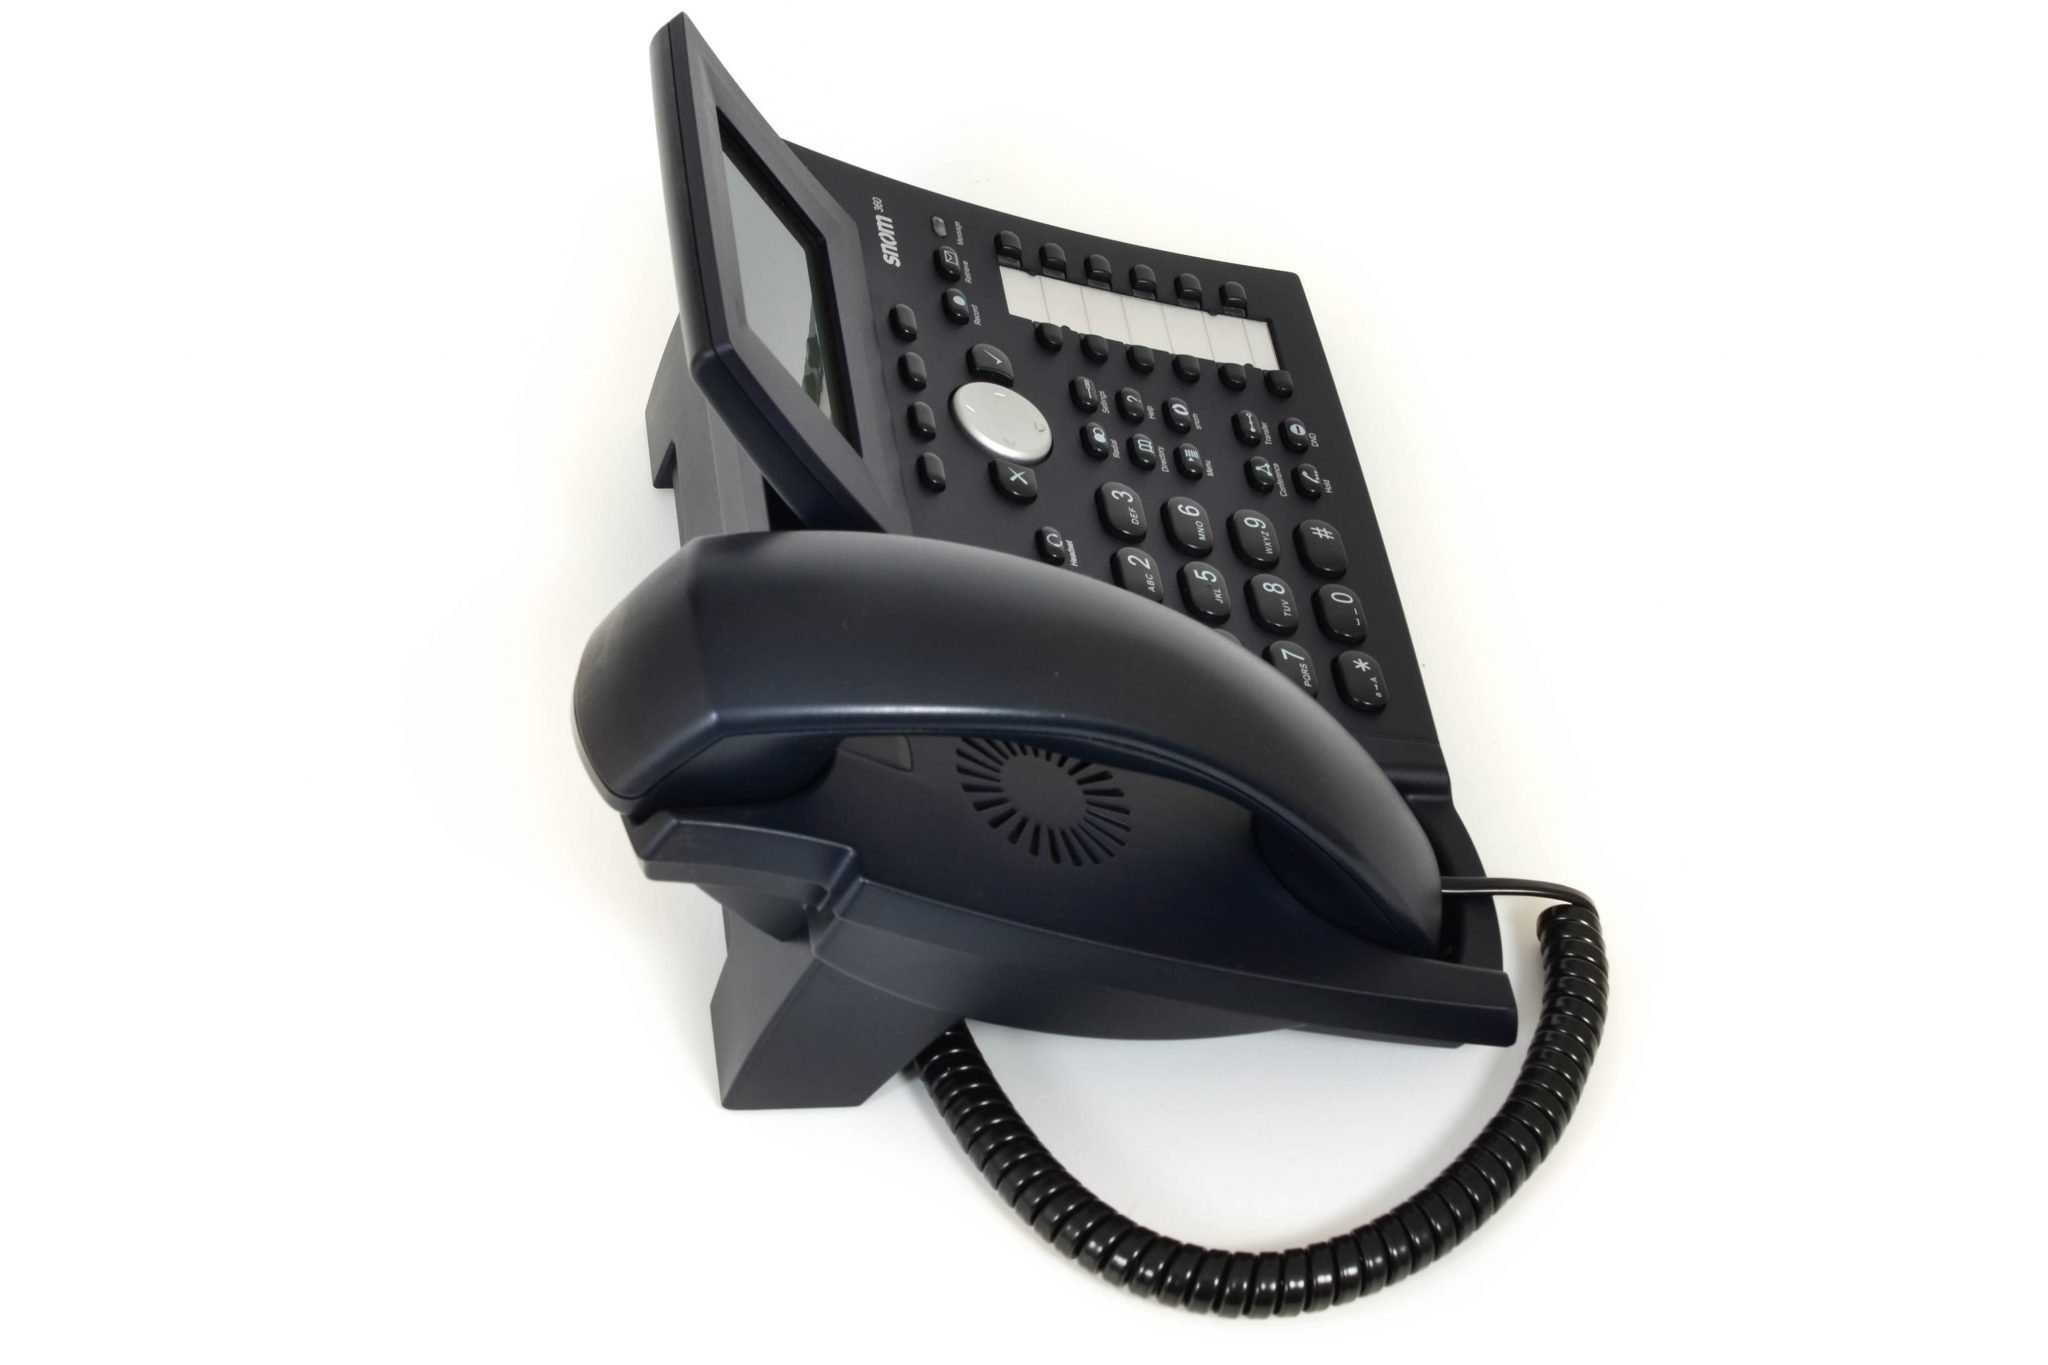 Details about   New Snom 360 VoIP Business Phone CHNWU10050601246 